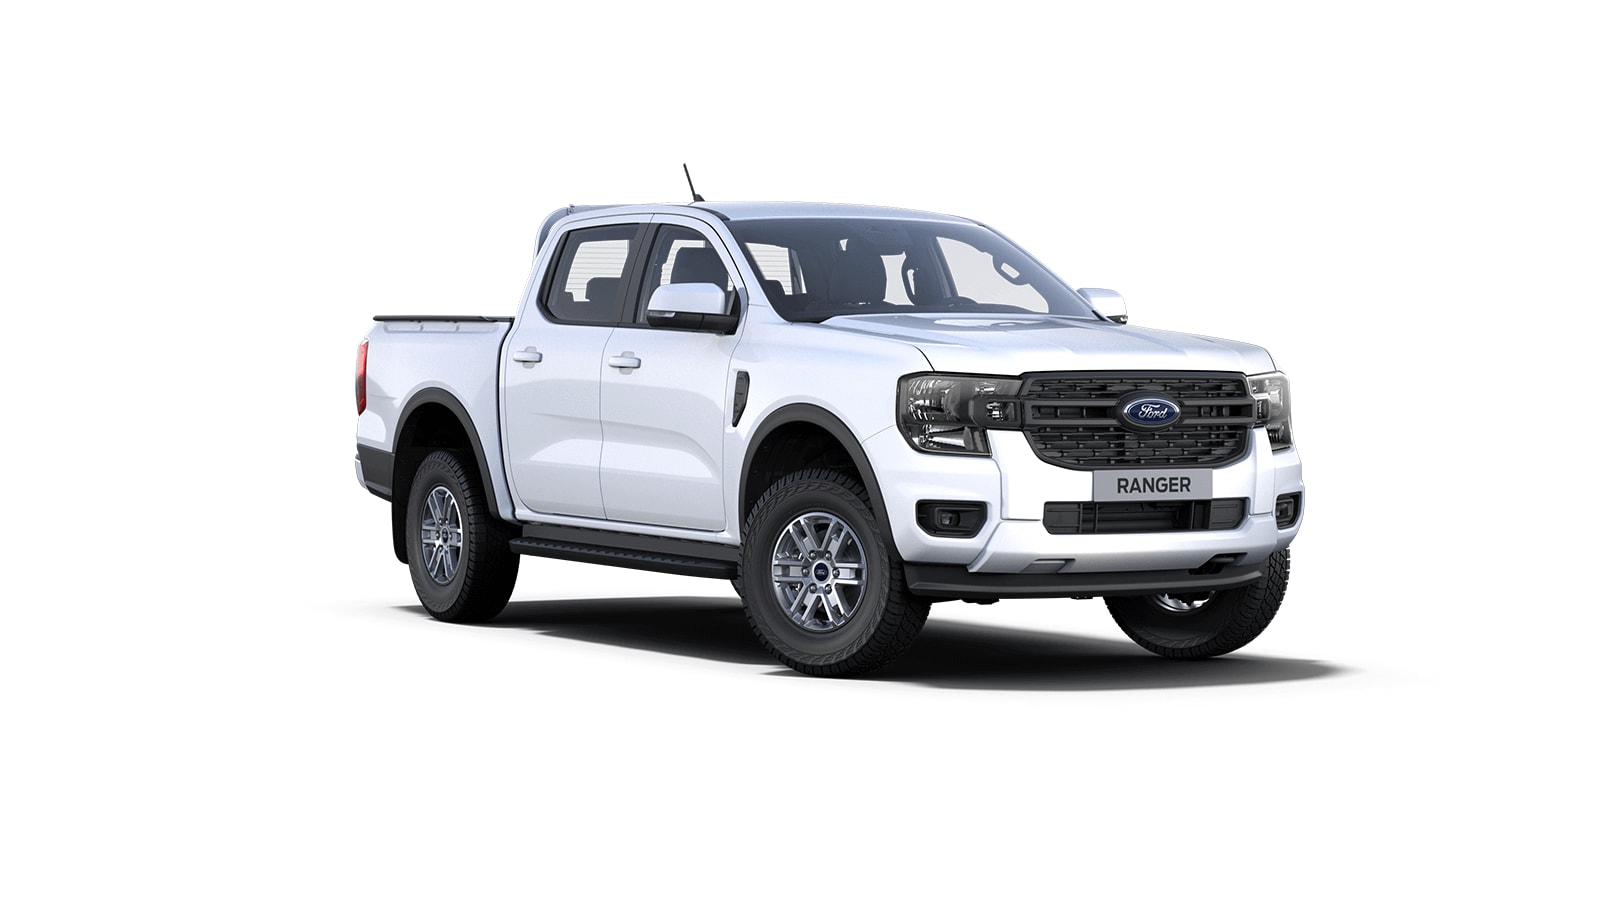 White Ford Ranger XLT from 3/4 front angle